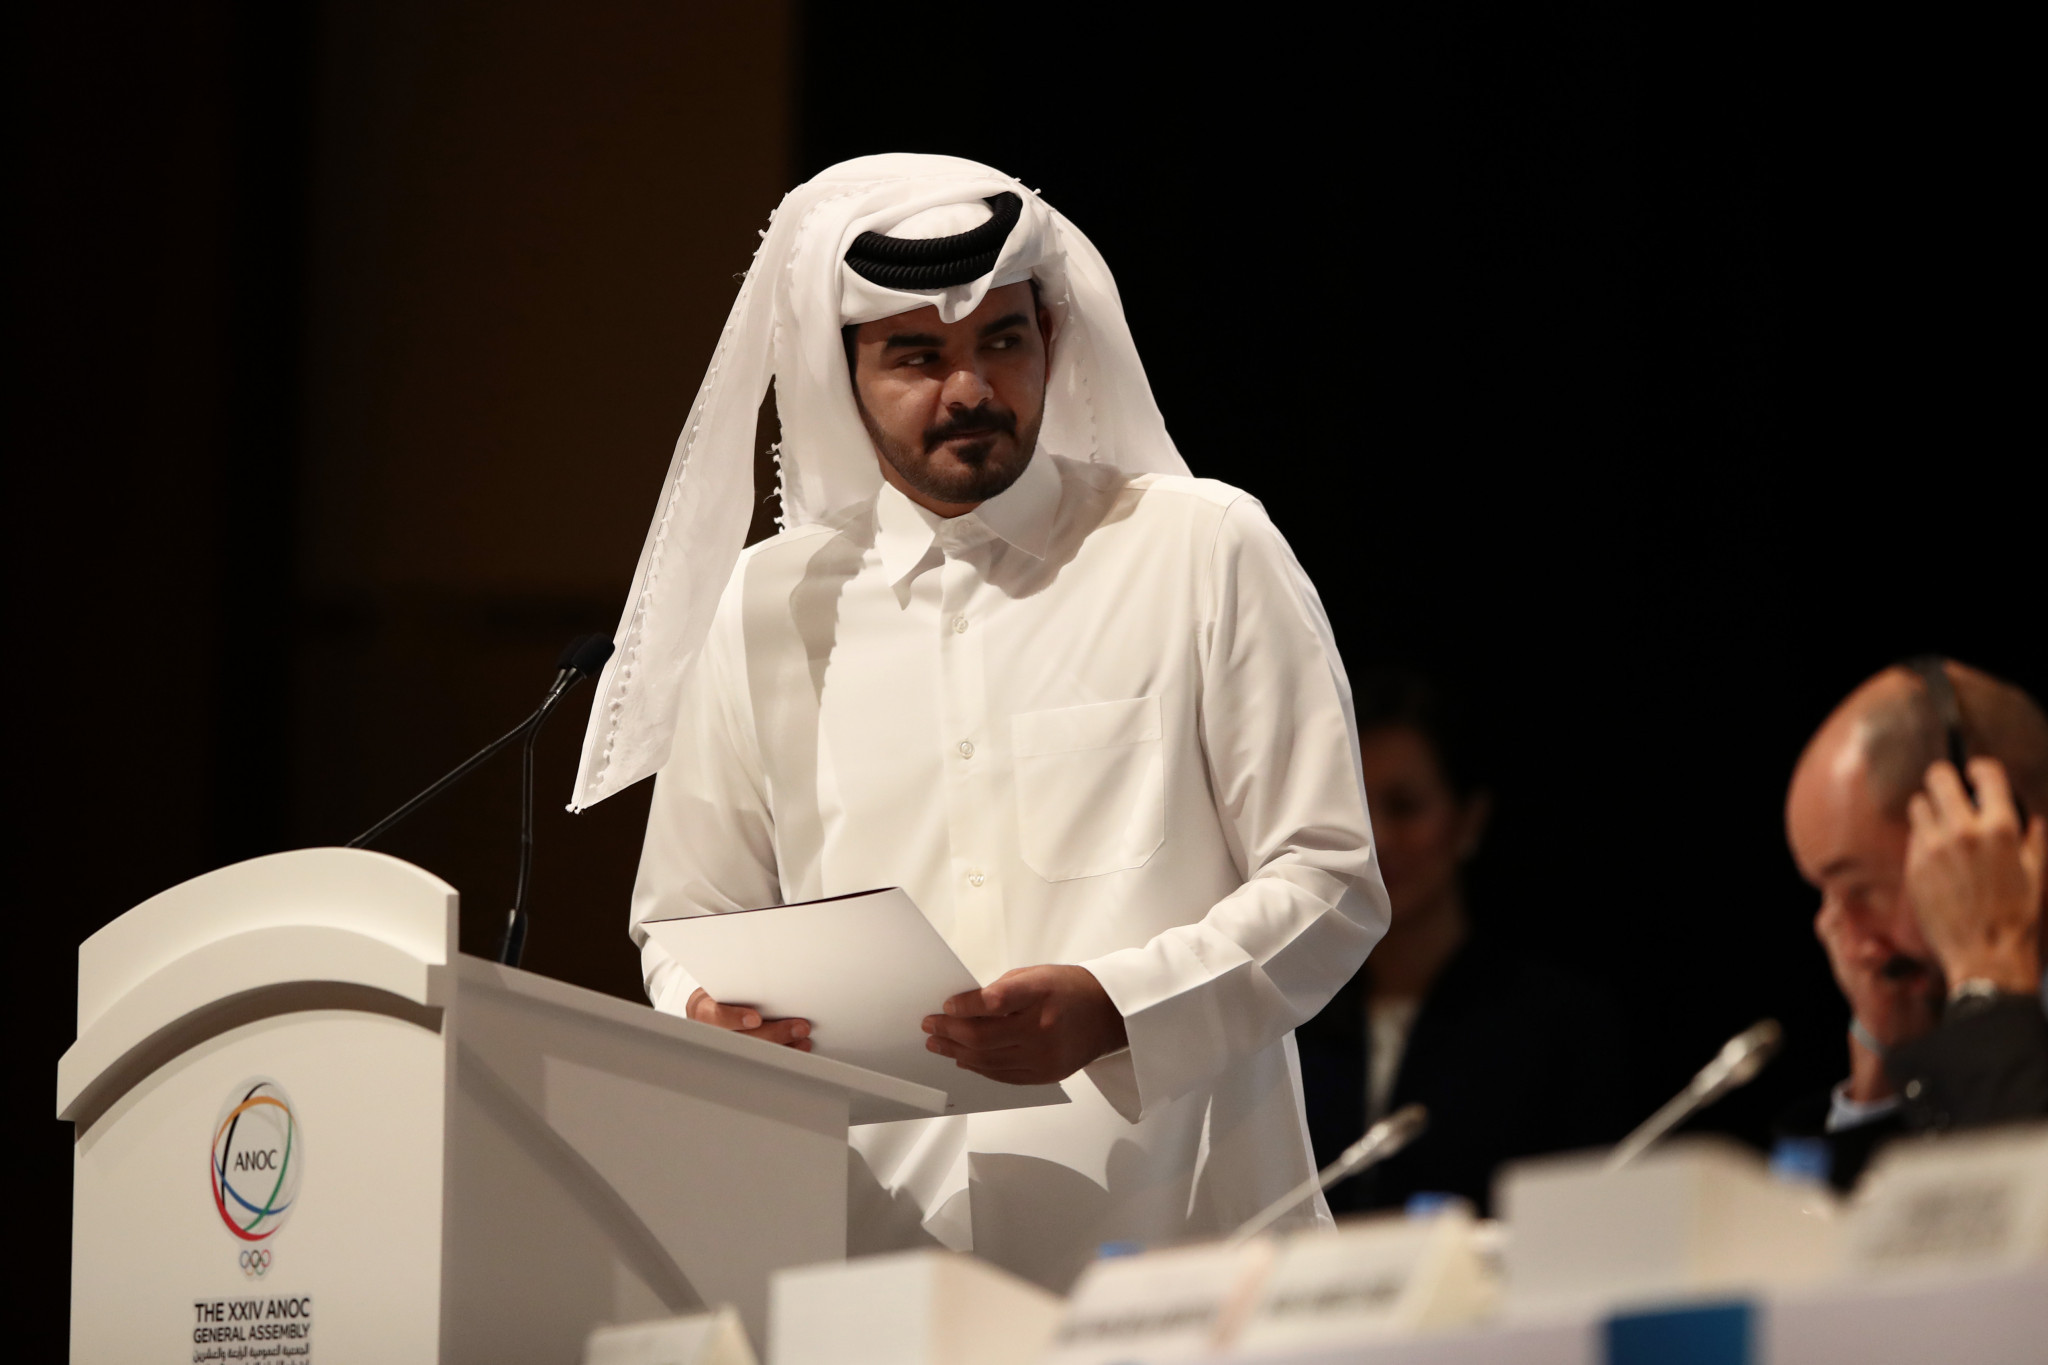 Sheikh Joaan bin Hamad Al-Thani was put forward for the ANOC role by his continental association, the Olympic Council of Asia ©Getty Images